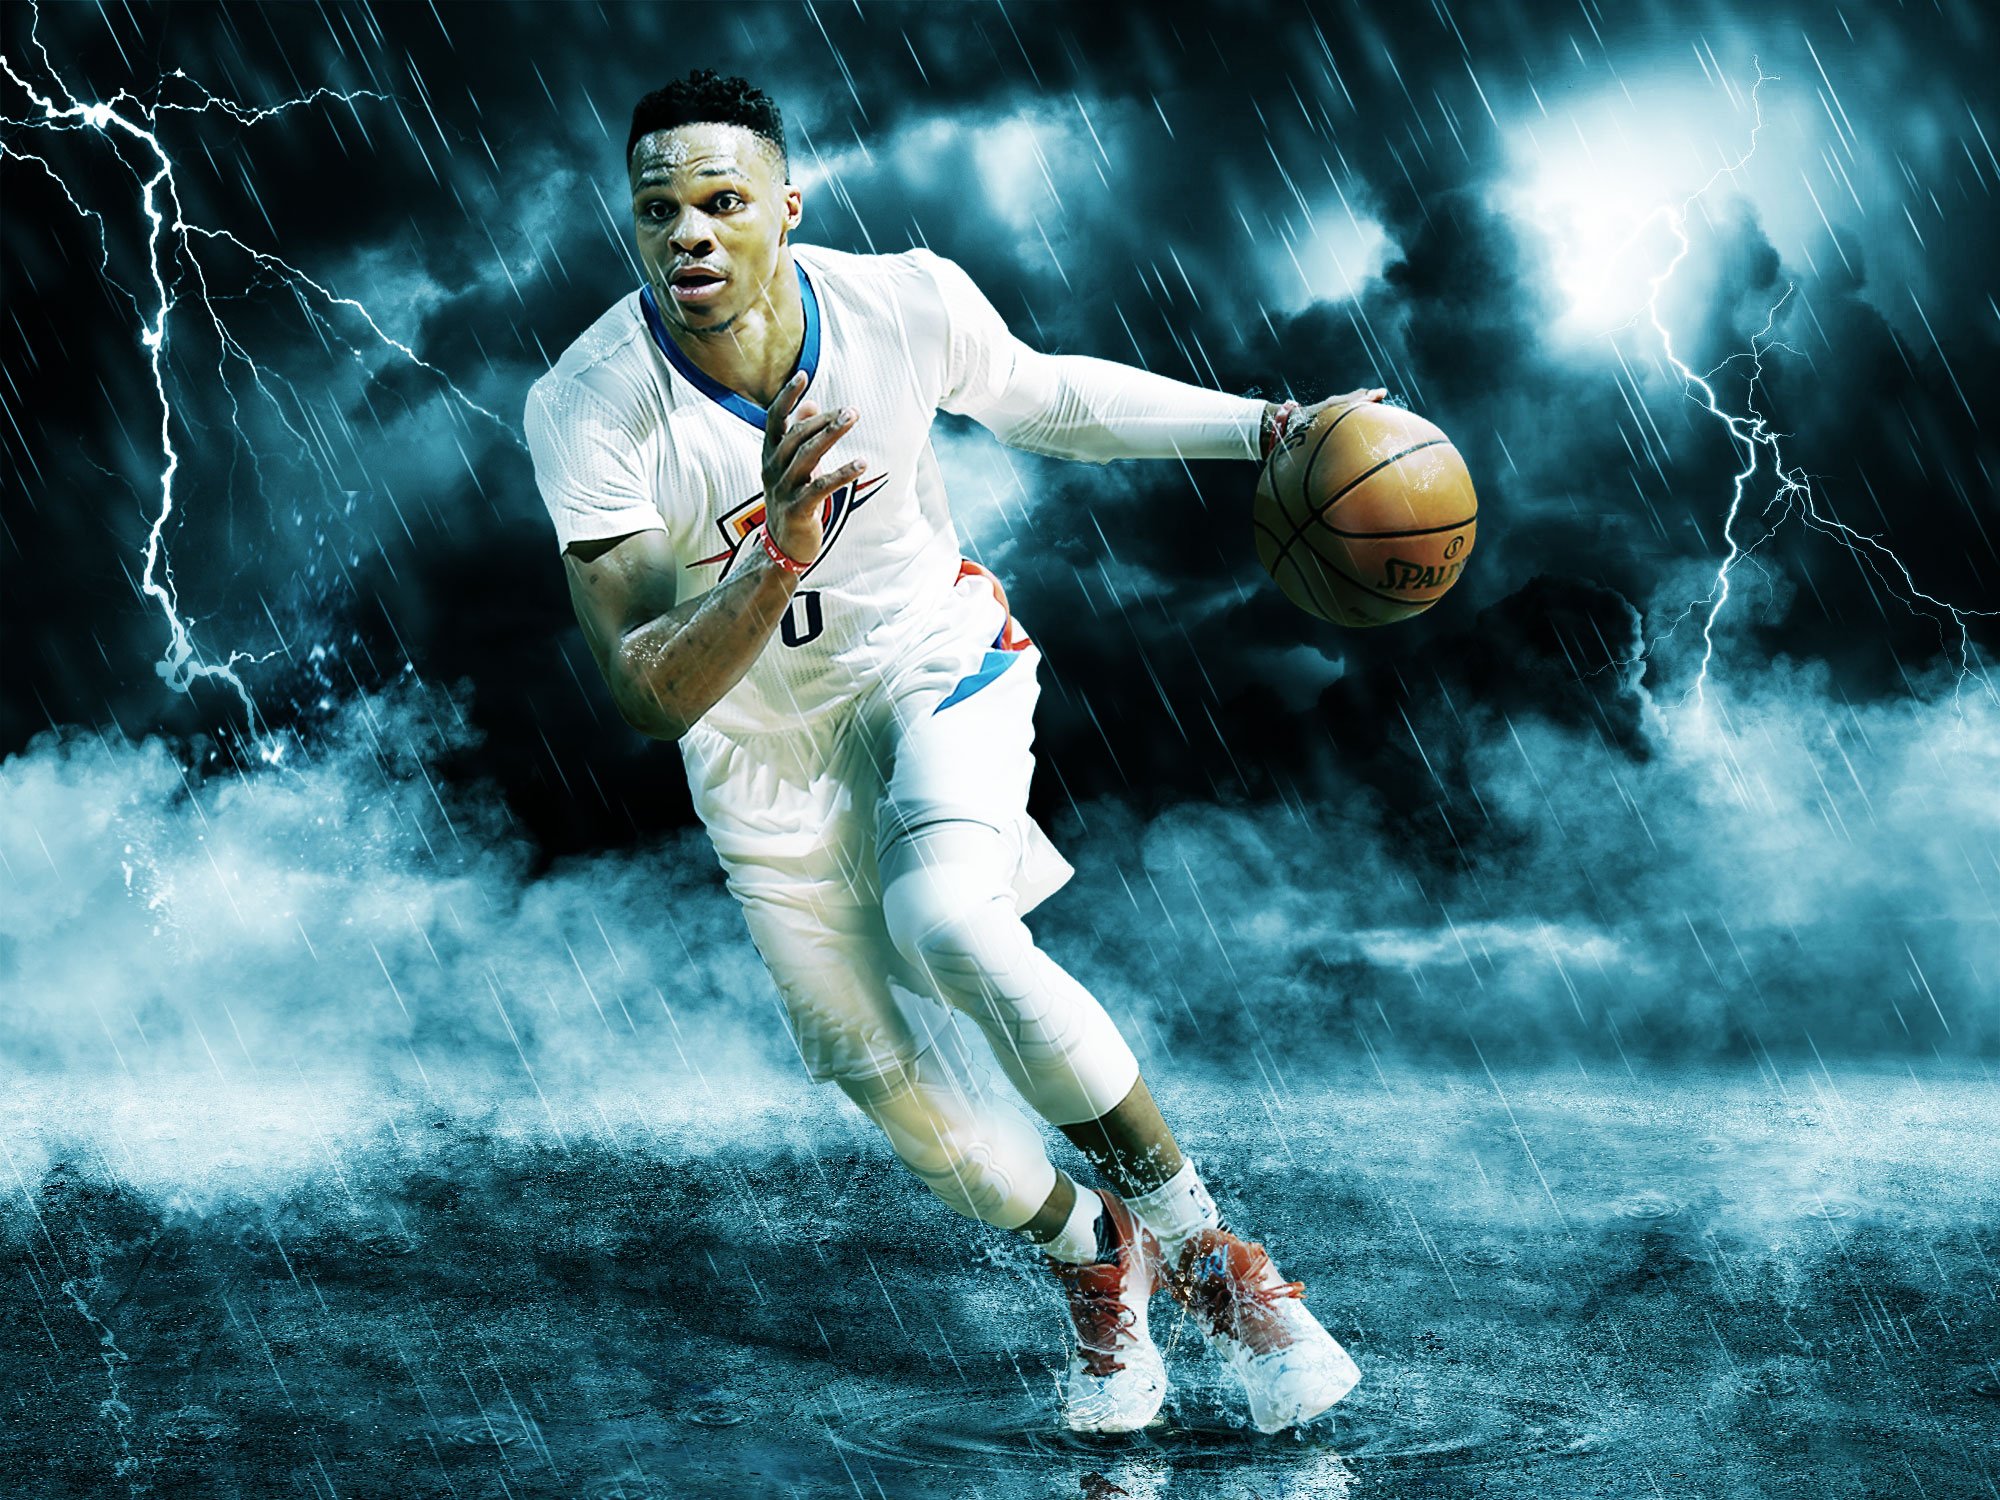 Russell Westbrook Wallpaper HD 78 images